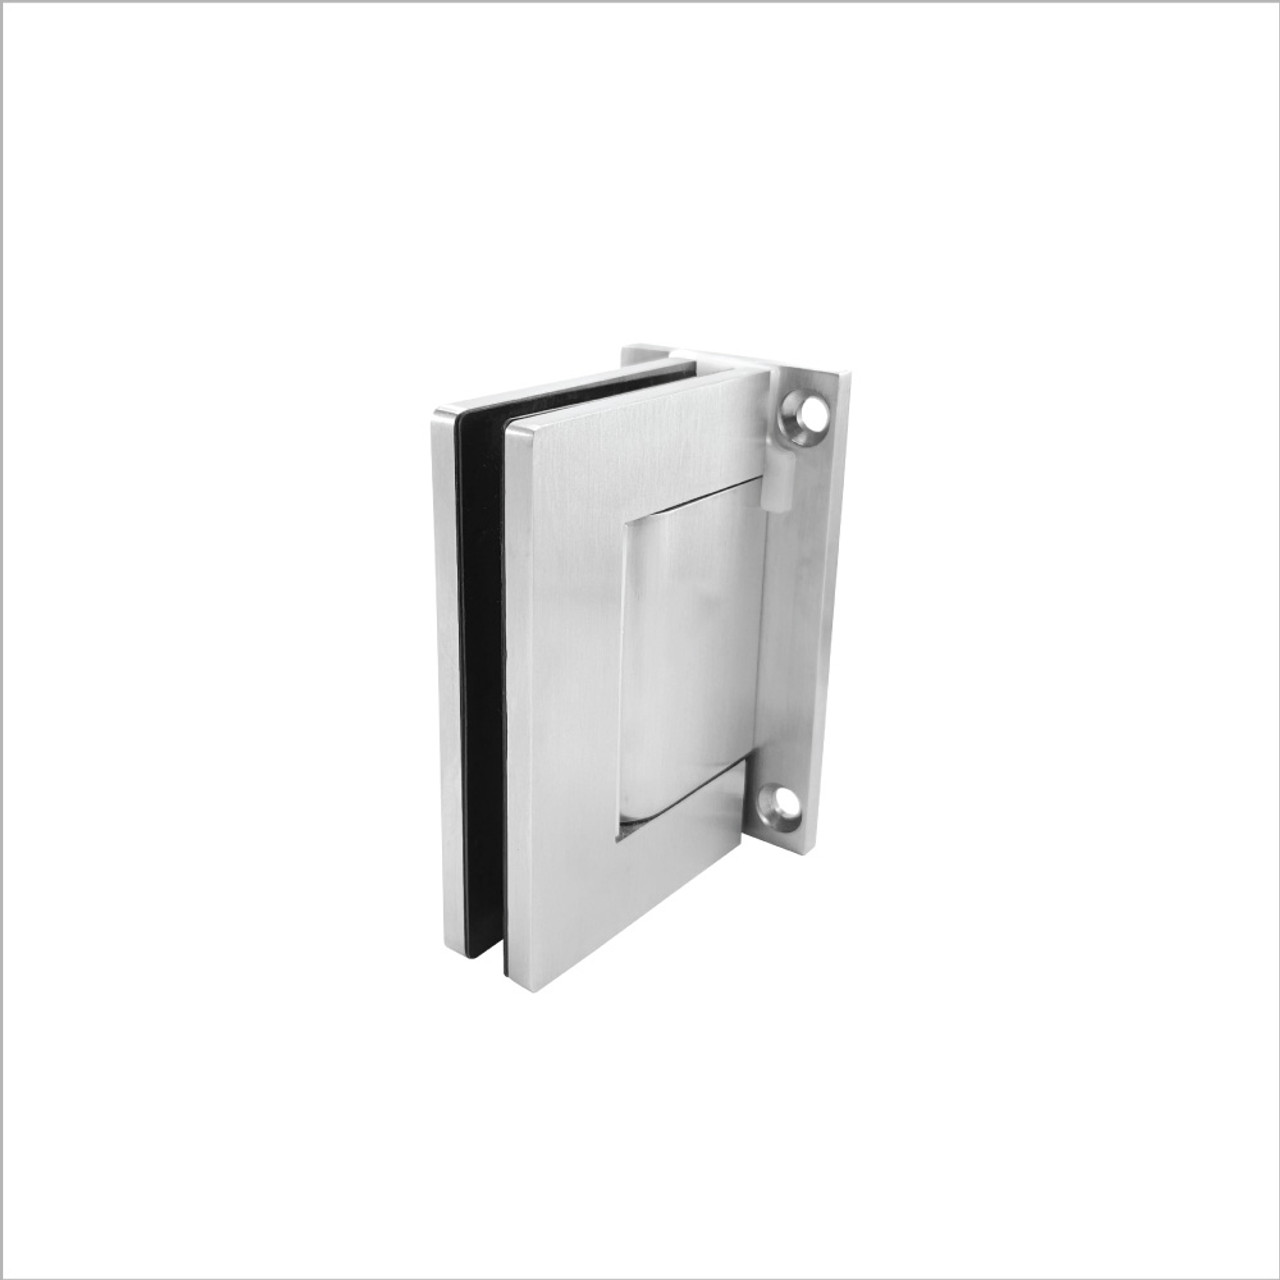 HHWM60NHO | Wall to Glass Non Hold Open Hydraulic Hinge